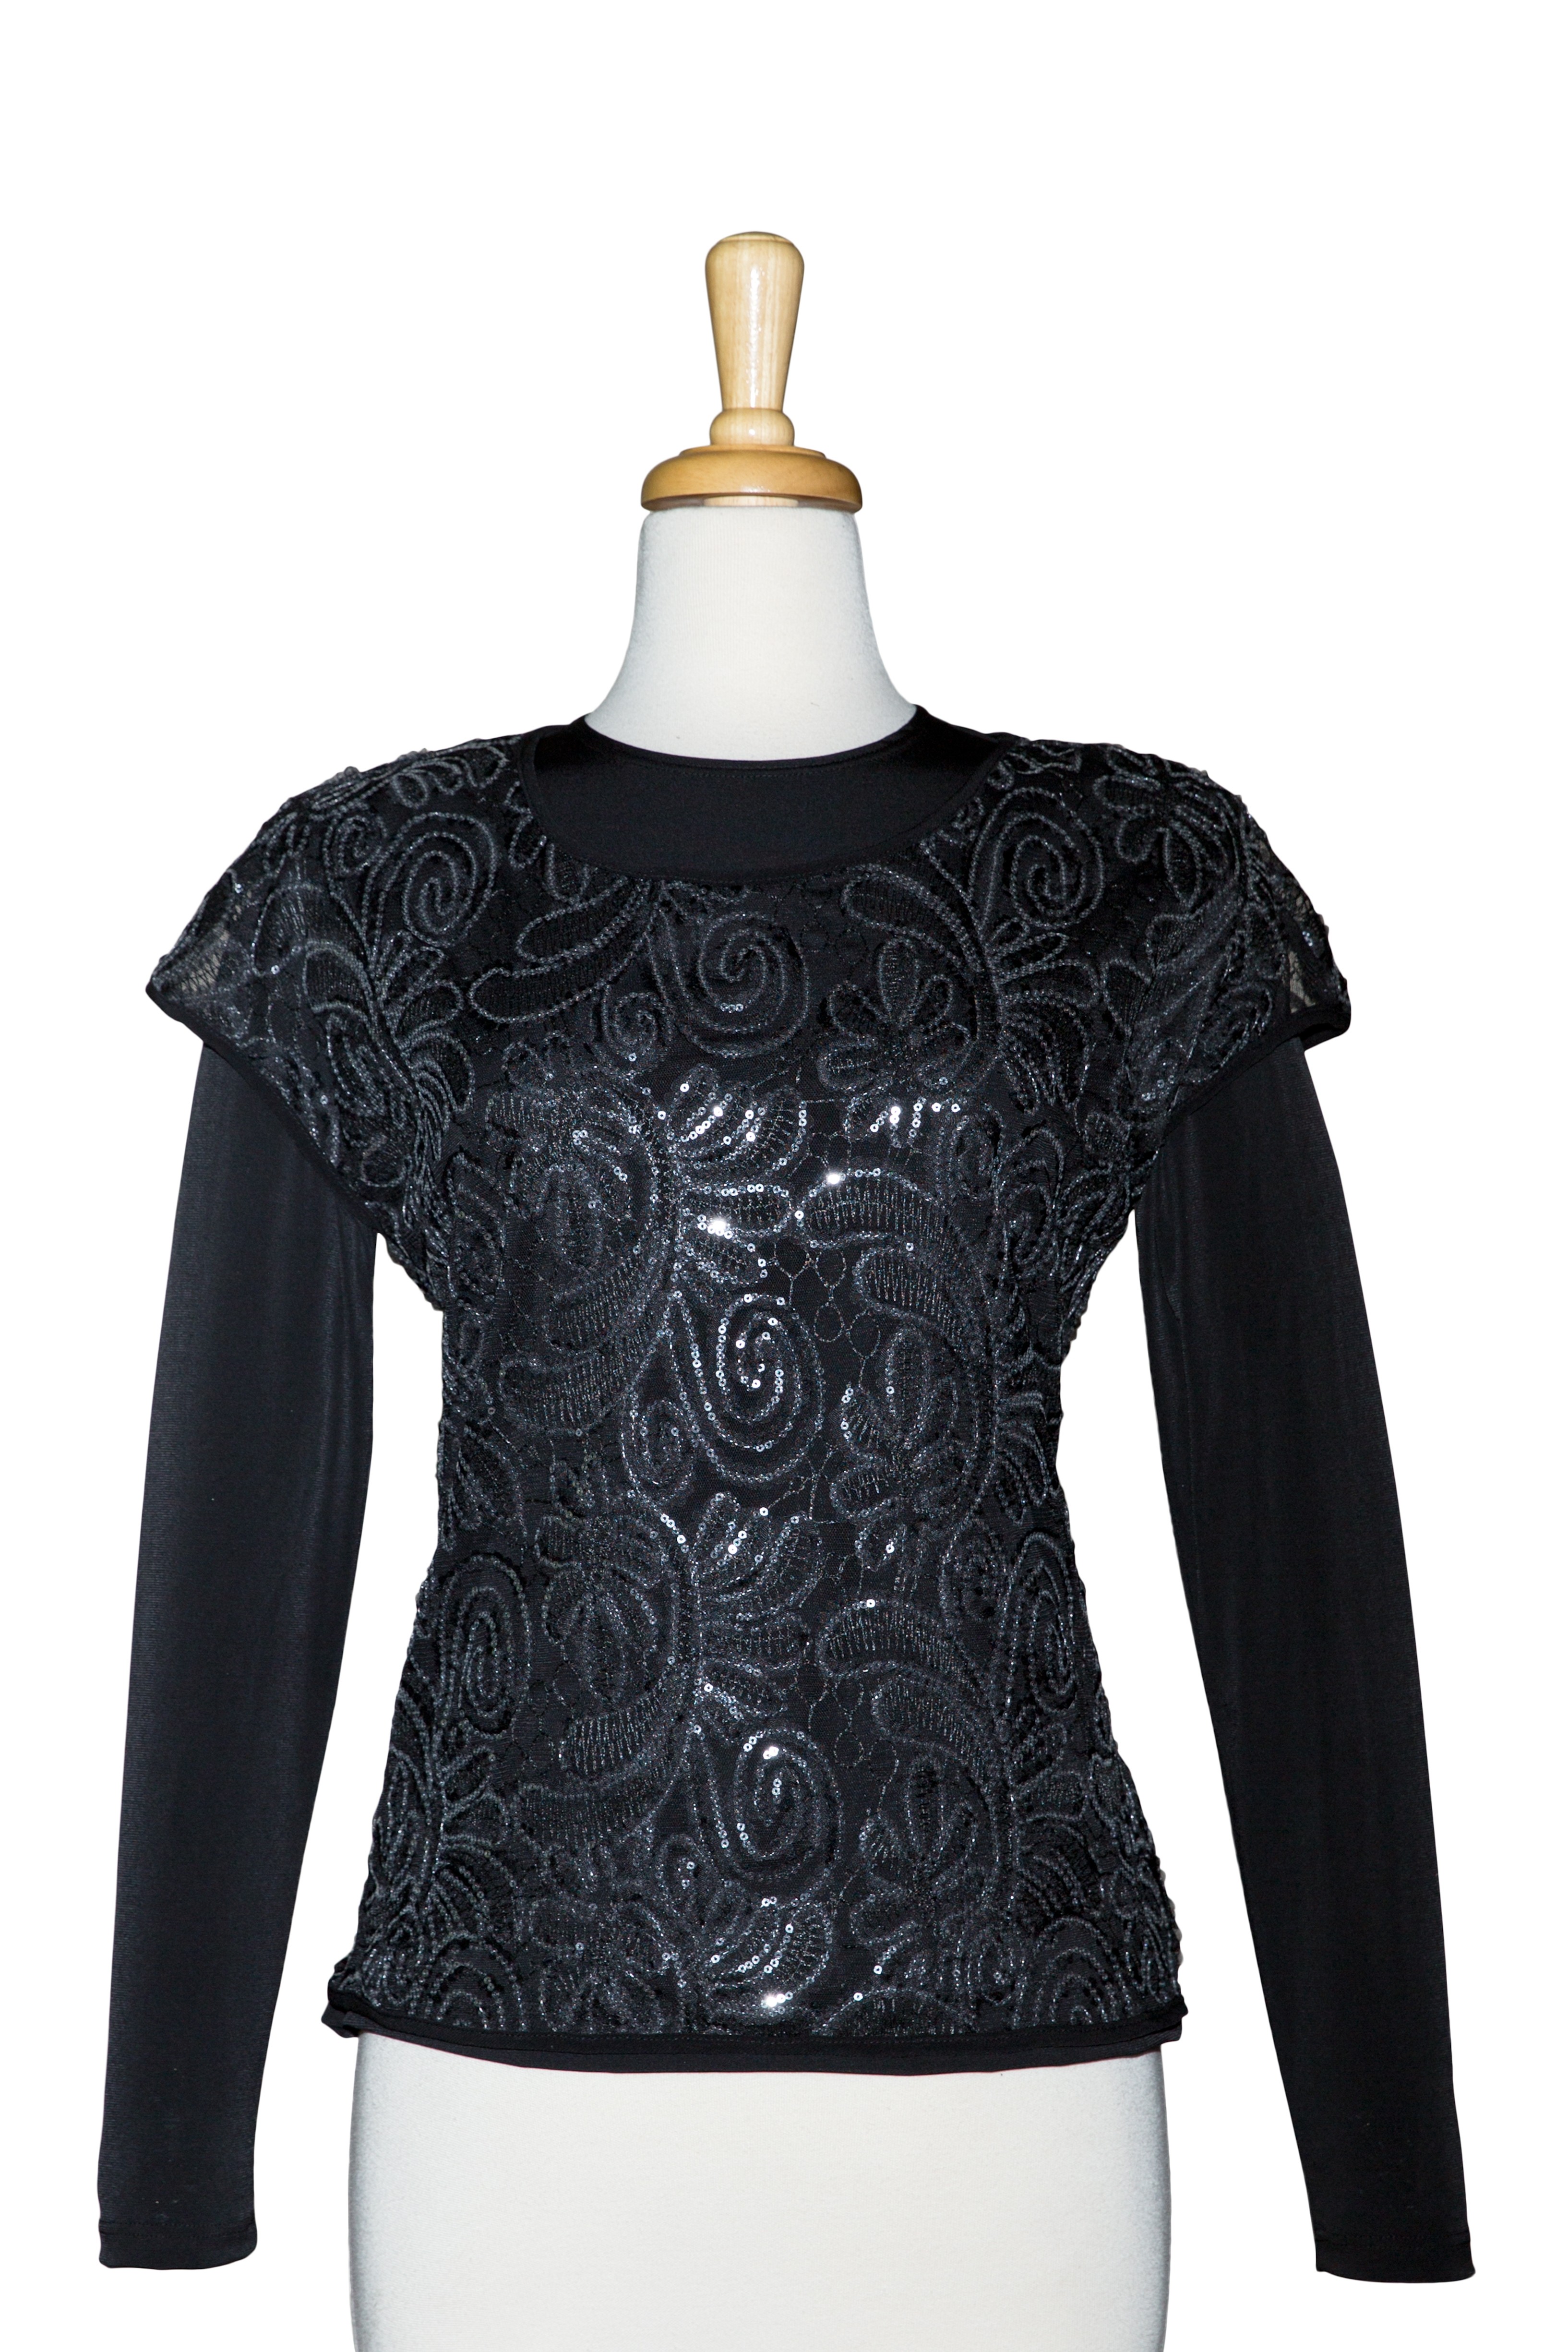 Black Paisley and Clear Sequins Lace Short Sleeve With Long Sleeve Microfiber Top